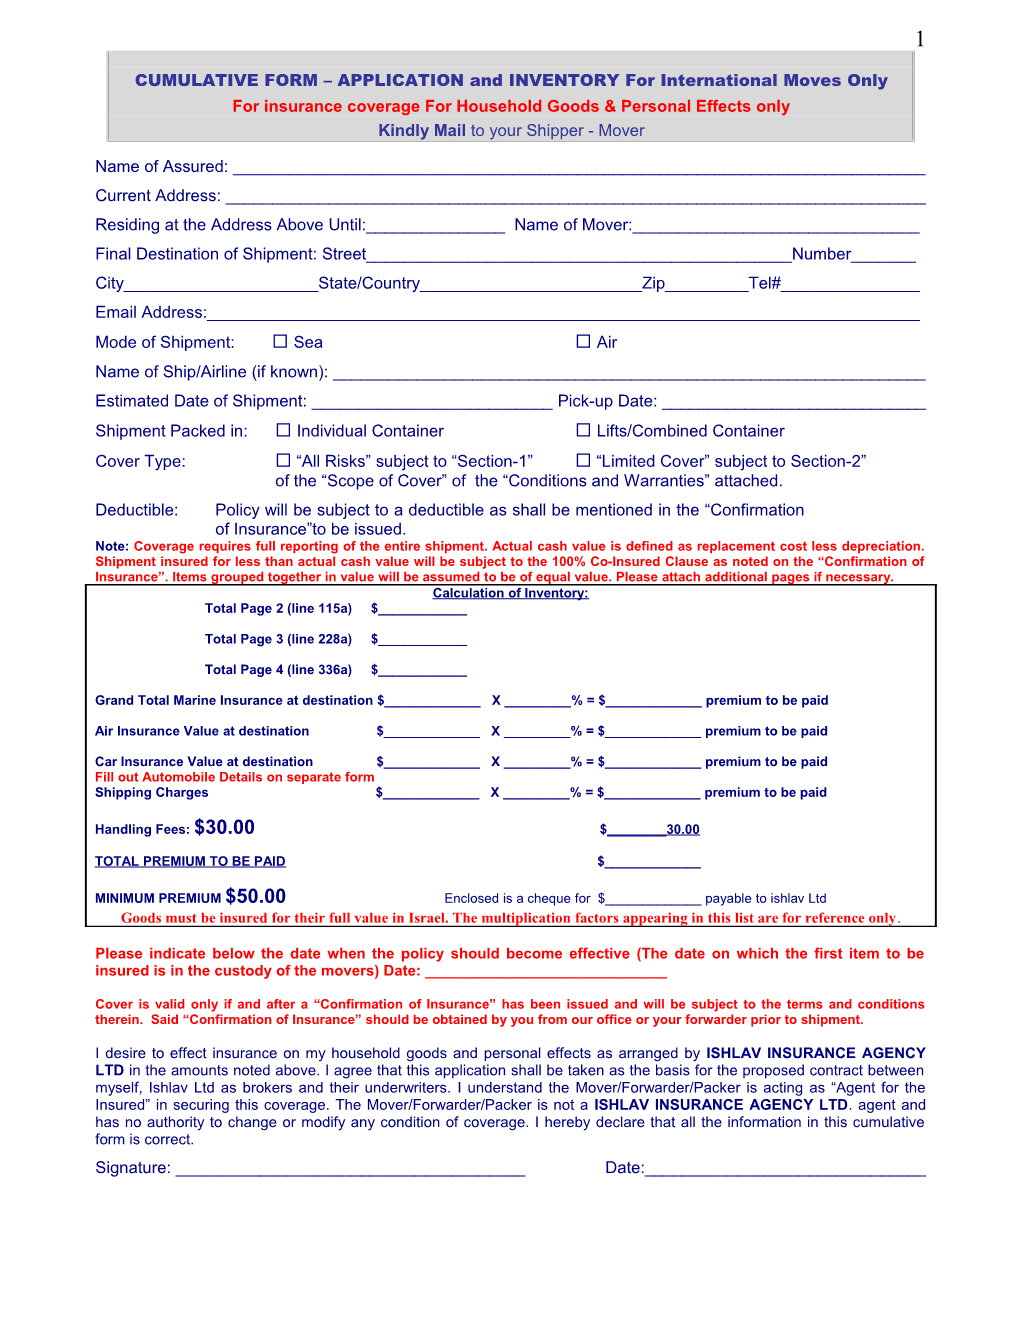 CUMULATIVE FORM APPLICATION and INVENTORY for International Moves Only